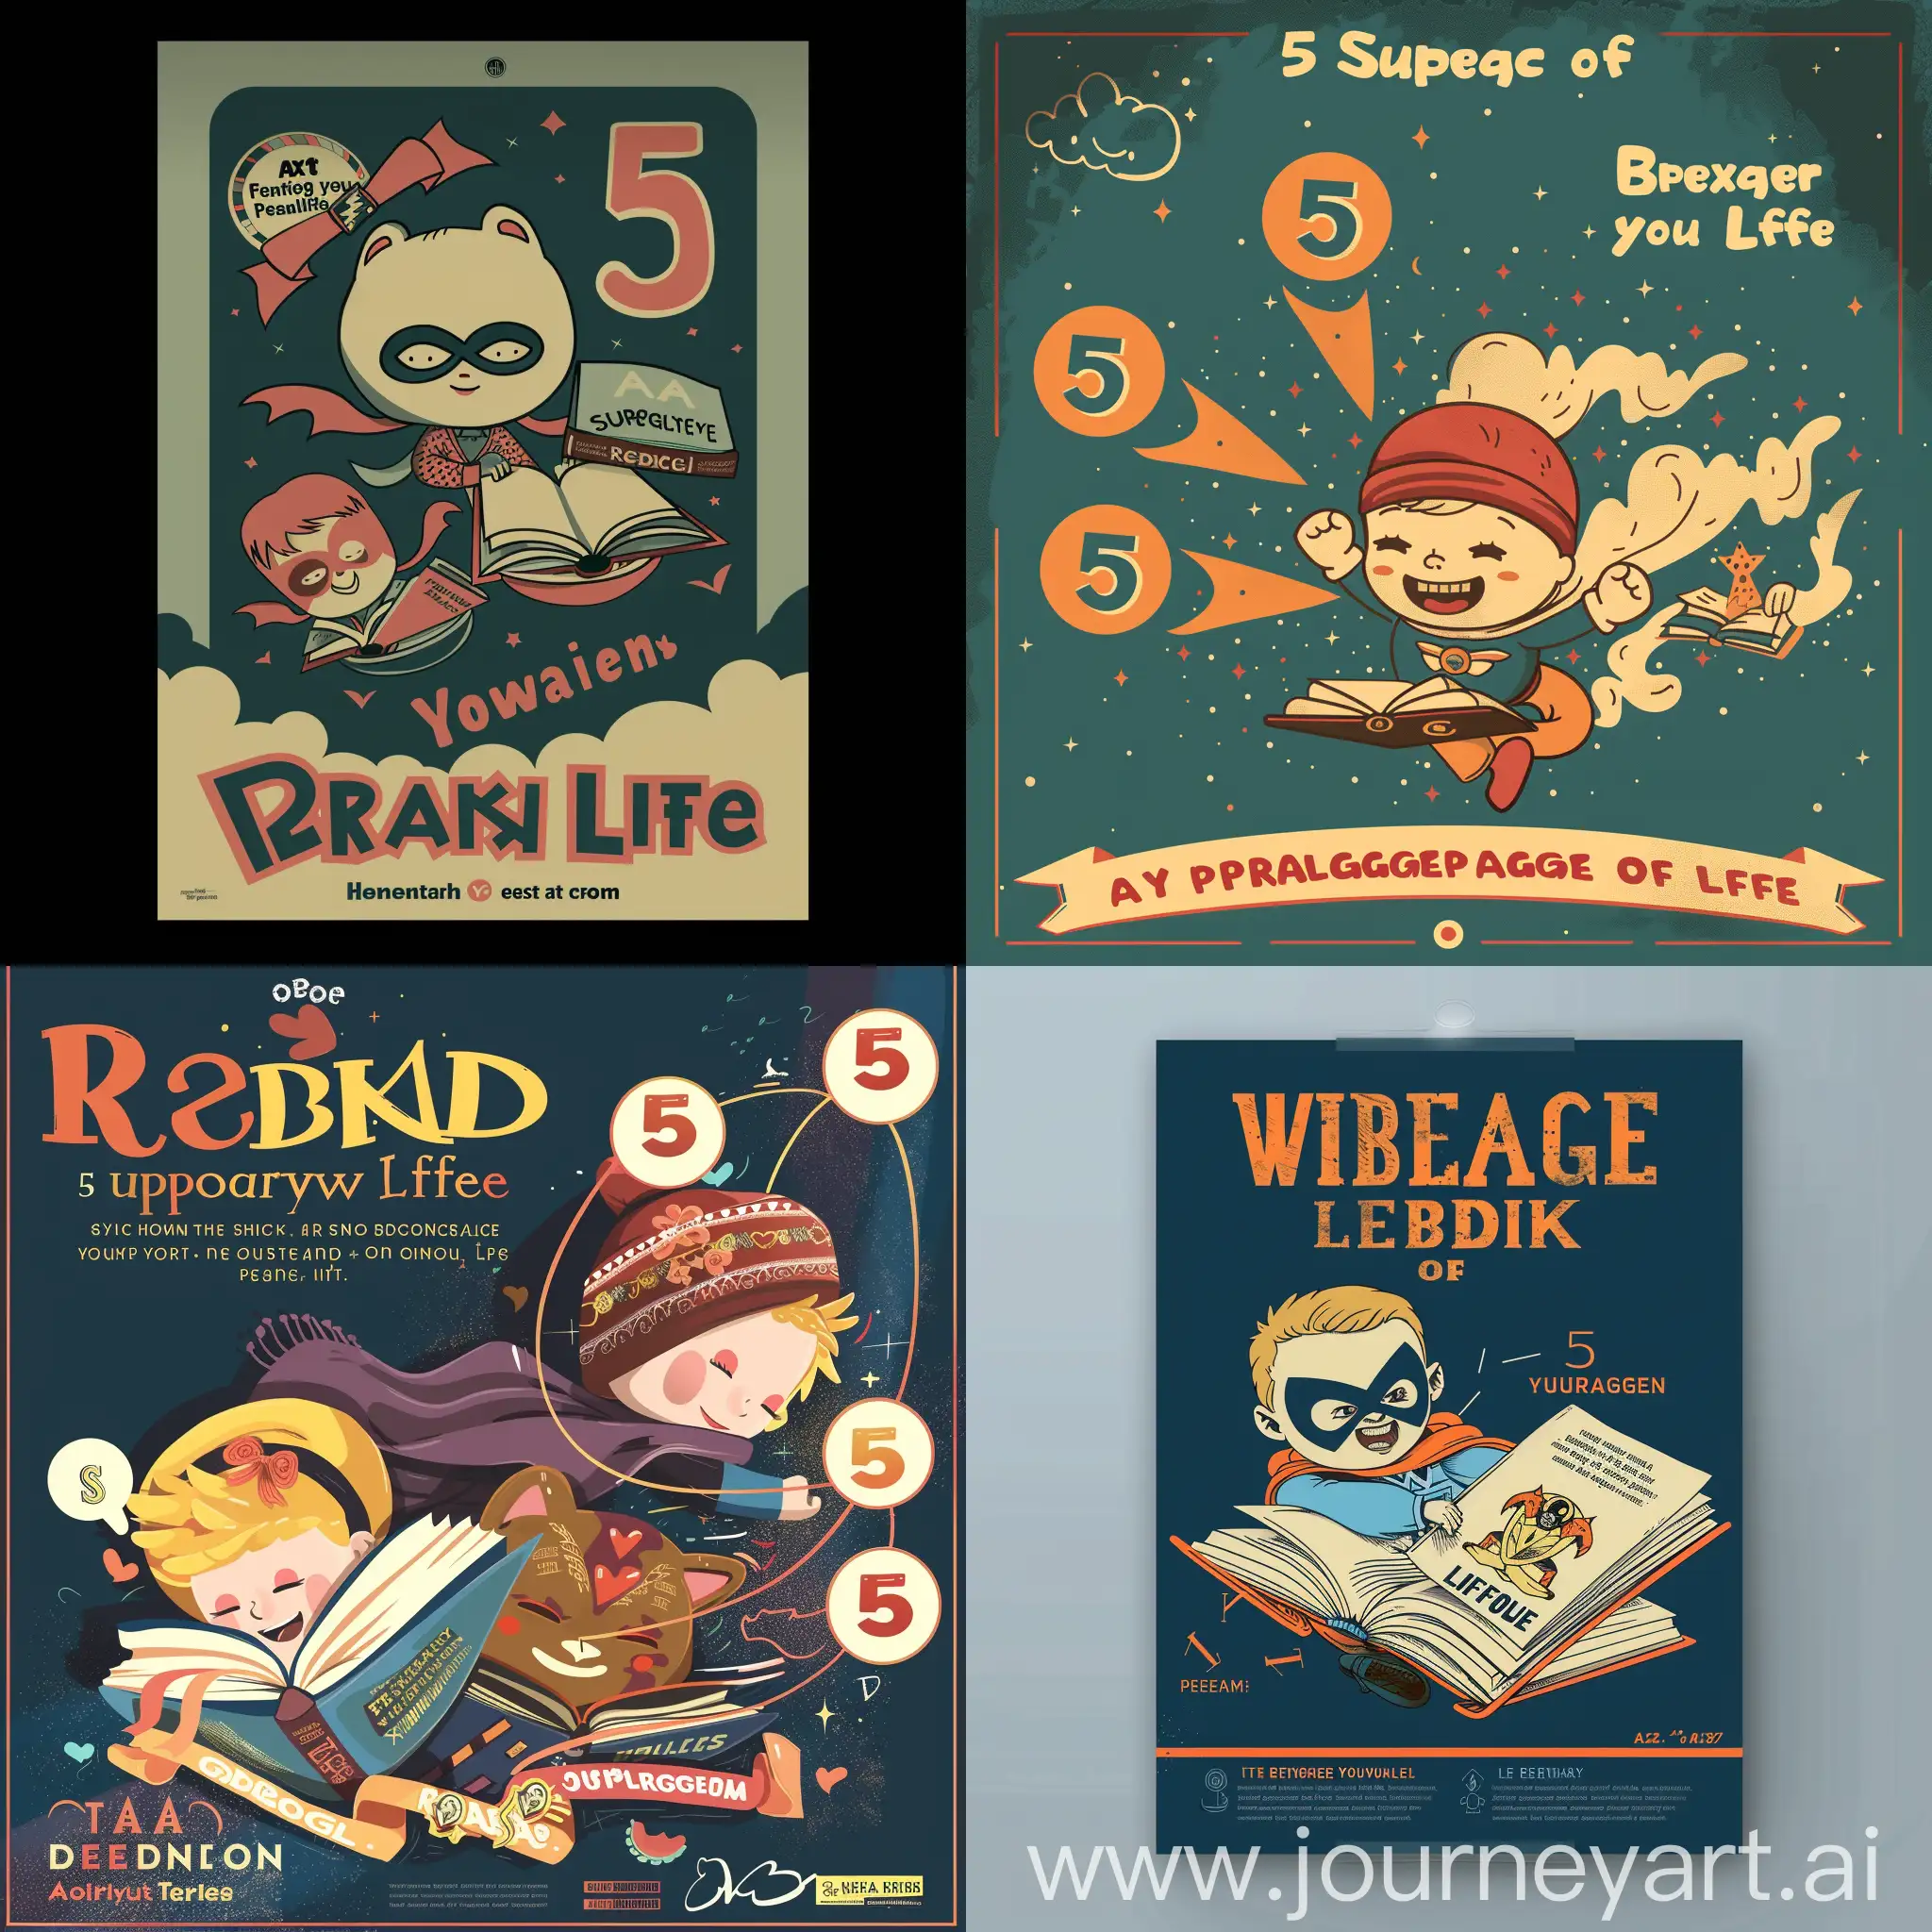 Design an A4 poster of 5 benefits of reading. 
The poster must be attractive for teeangers and I would like the 5 benefits to each be depicted as a superpower to supercharge your life
